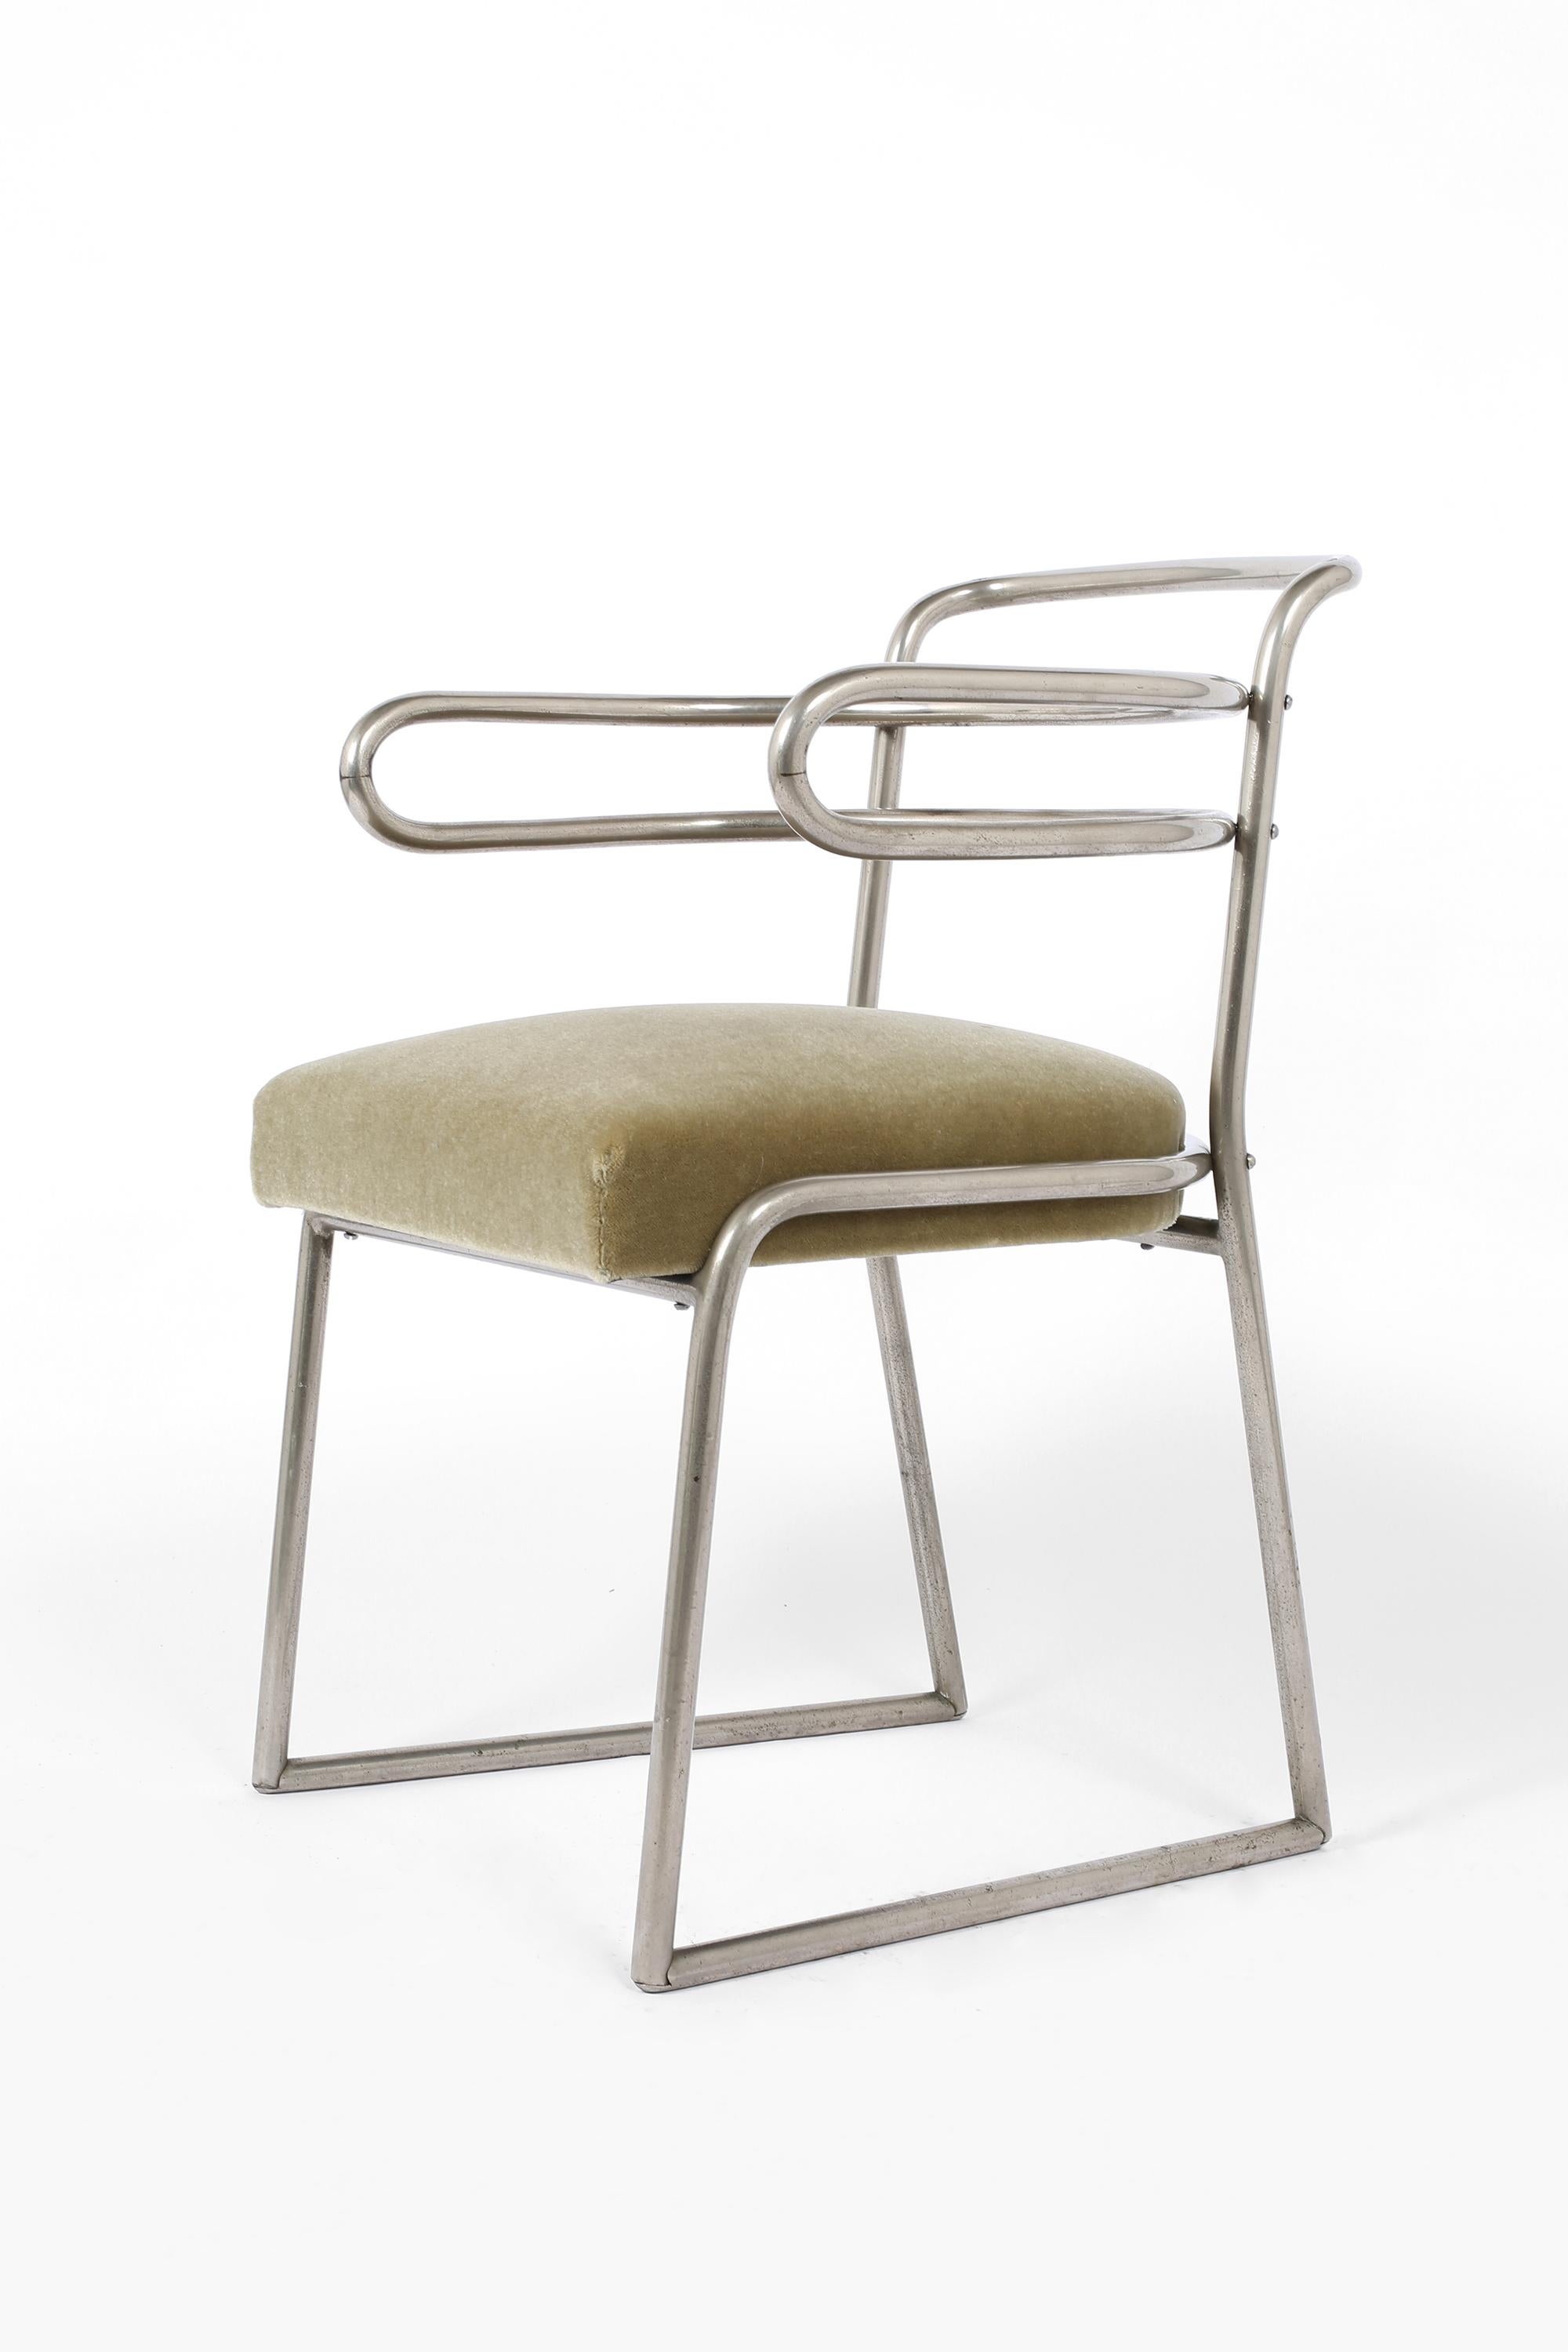 A rare armchair by modernist designer Louis Sognot. Featuring a nickel plated tubular steel frame, and sprung seat reupholstered in sage green mohair velvet. French, c. 1920s.